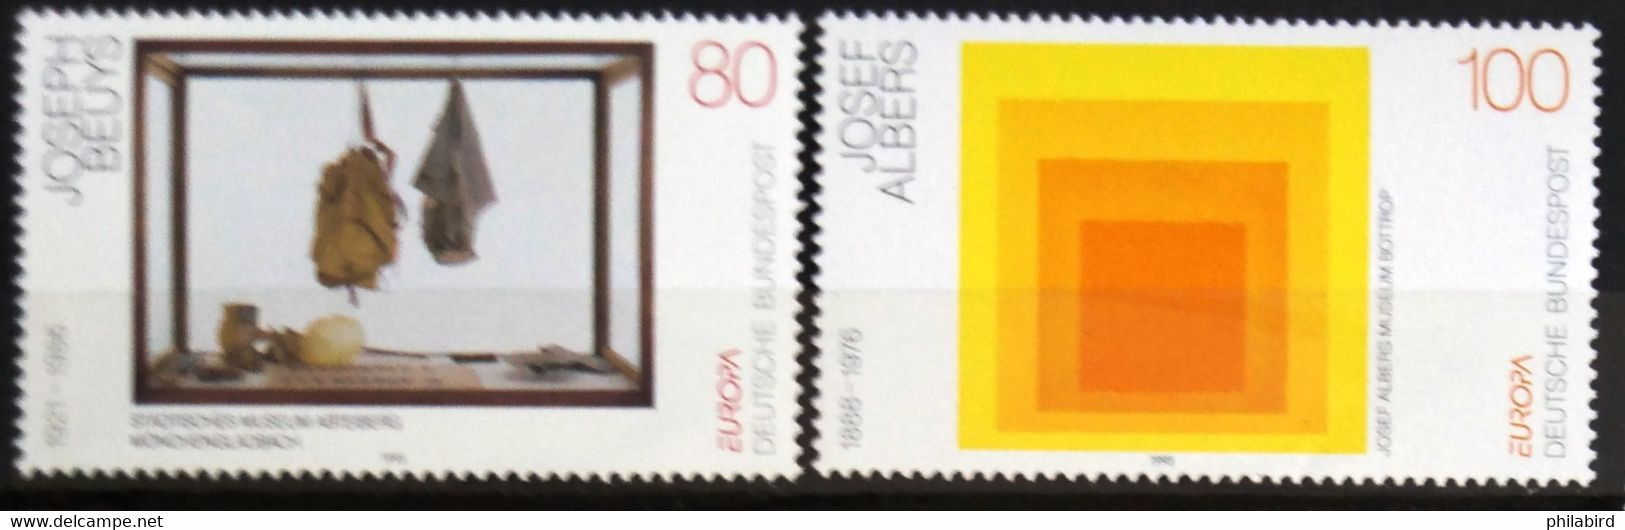 EUROPA 1993 - ALLEMAGNE                    N° 1504/1505                        NEUF** - 1993